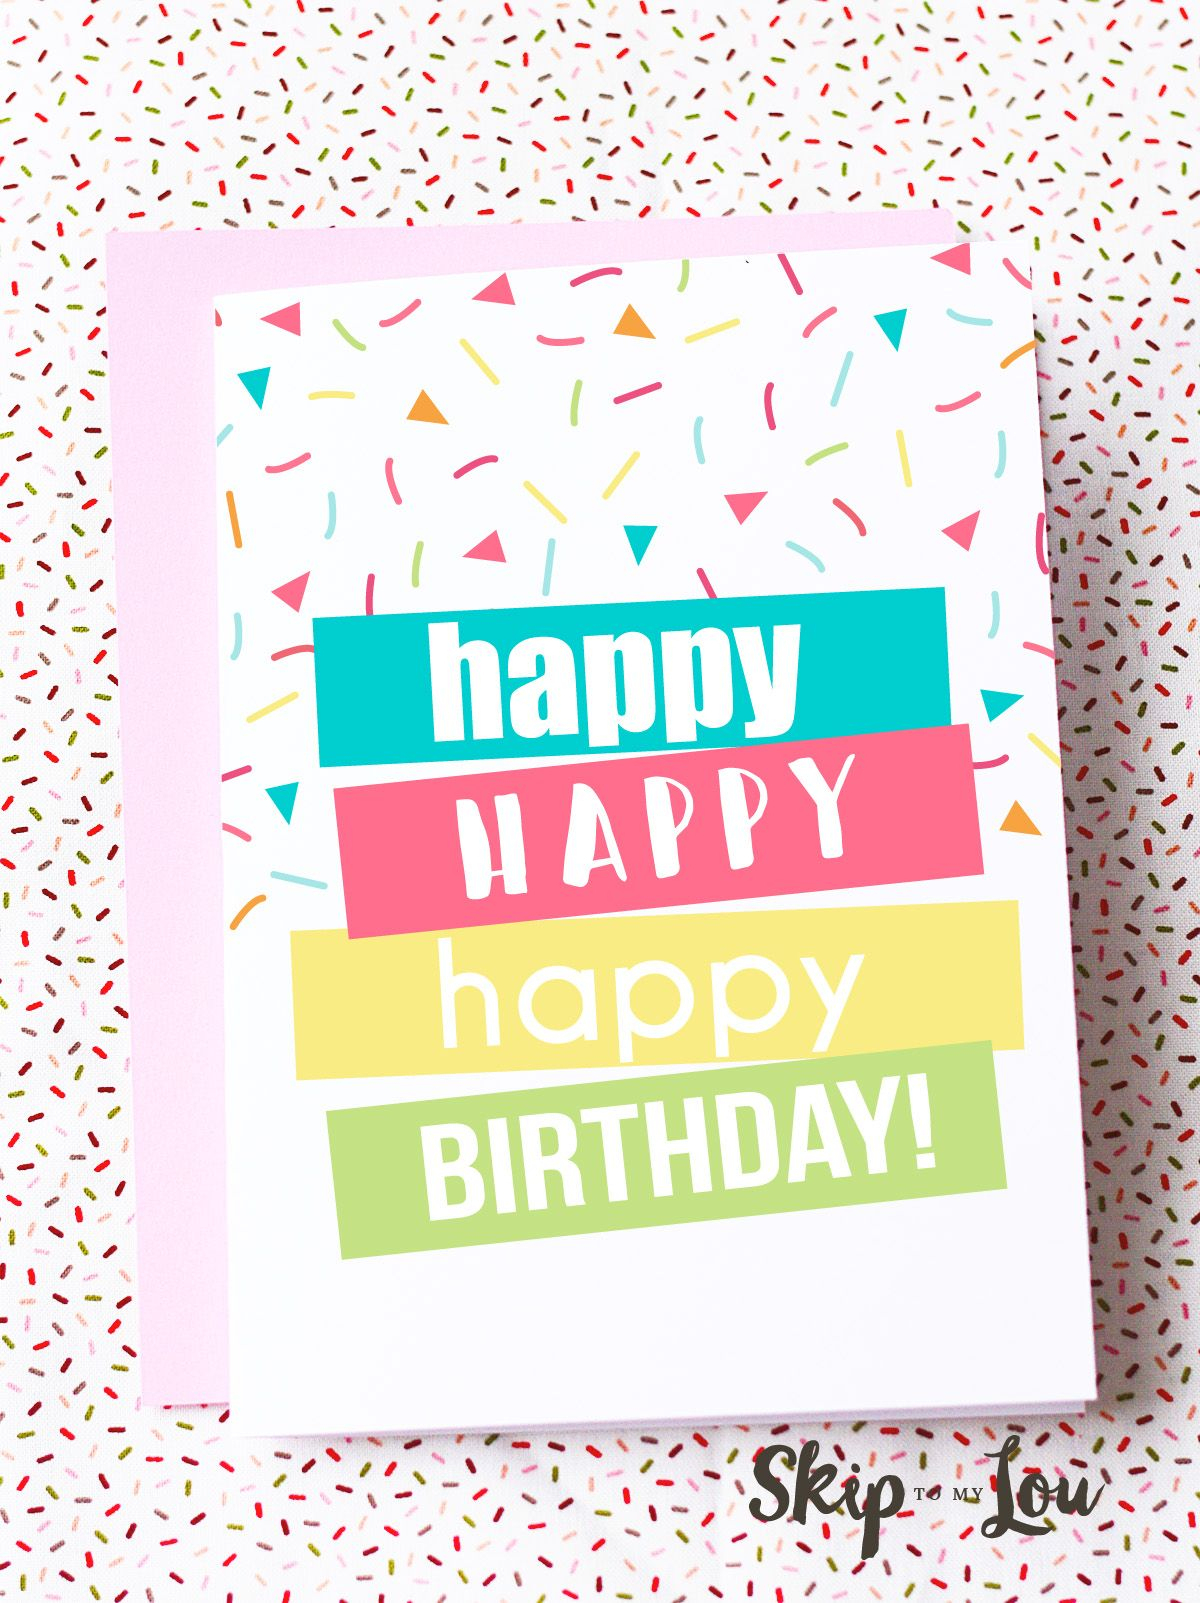 Printable Birthday Cards | Getting Crafty &amp;amp; Diy | Cards, Birthday - Free Printable Birthday Cards For Wife